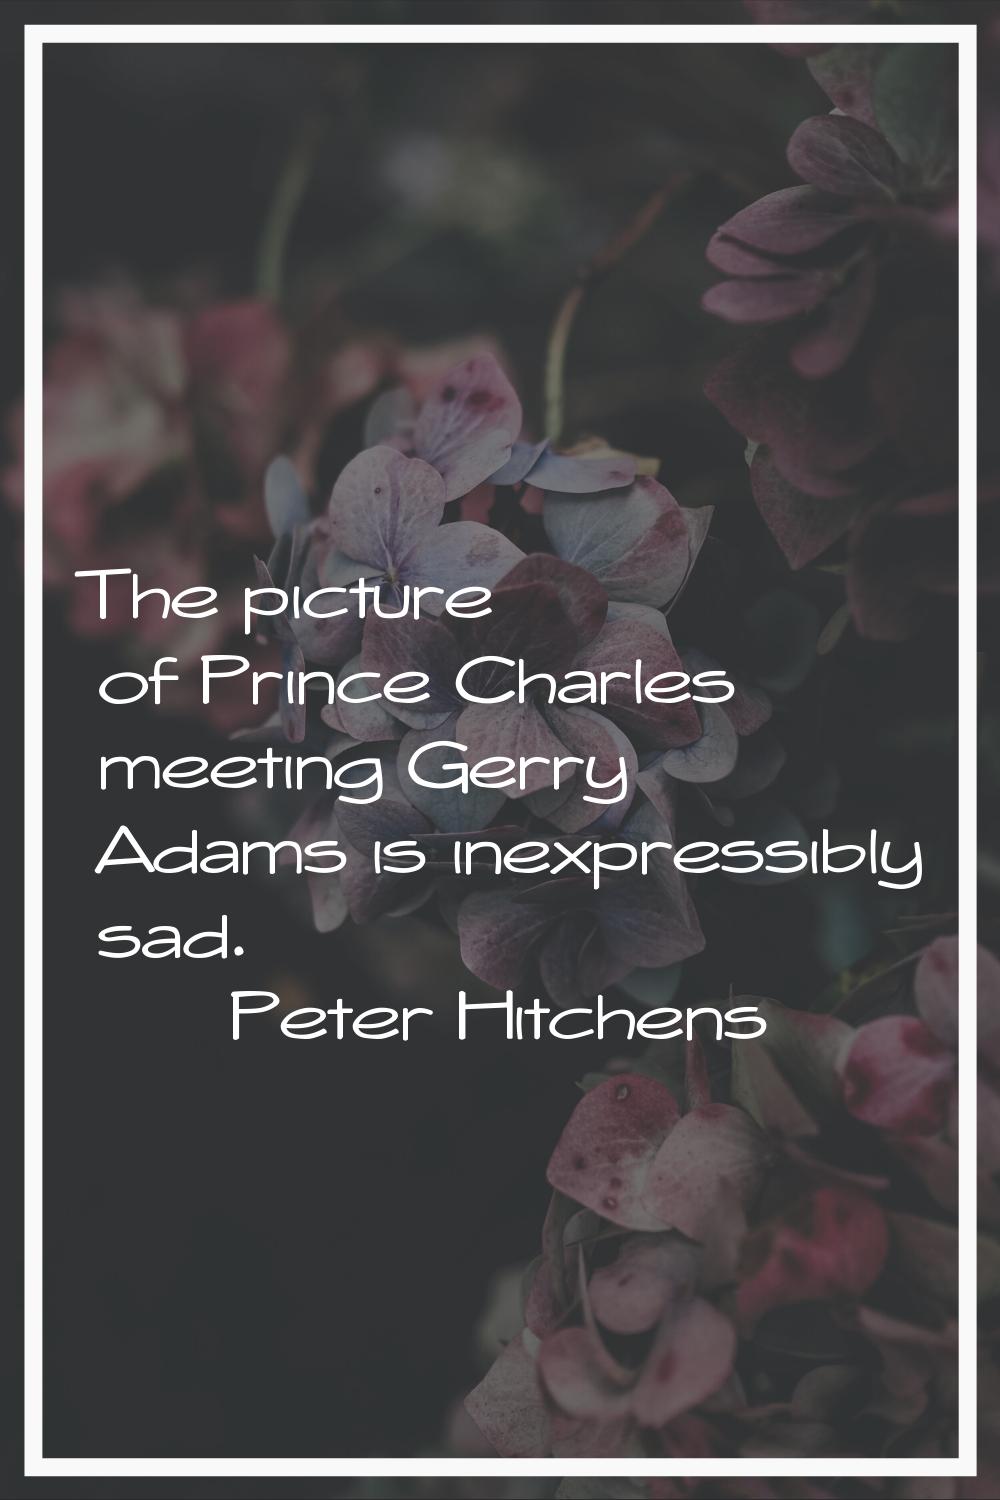 The picture of Prince Charles meeting Gerry Adams is inexpressibly sad.